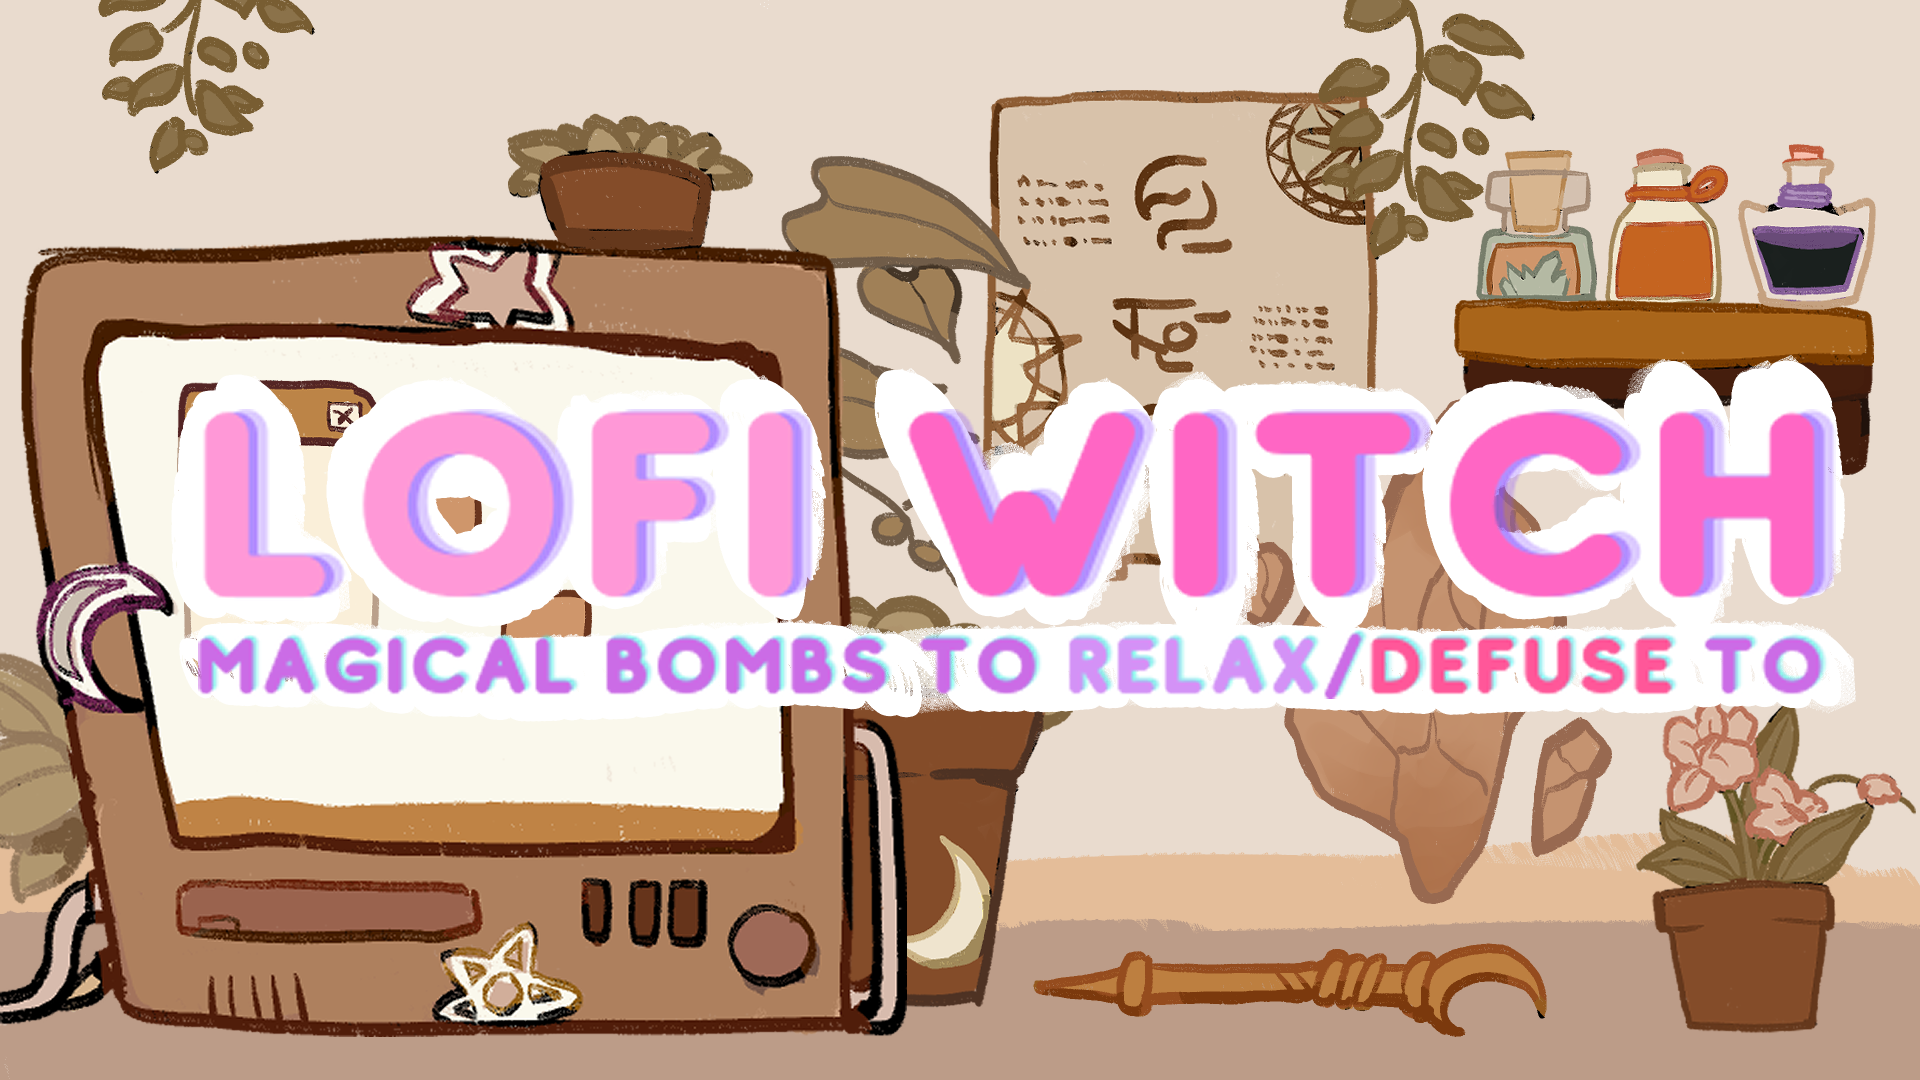 Lofi witch: Magical bombs to relax/defuse to